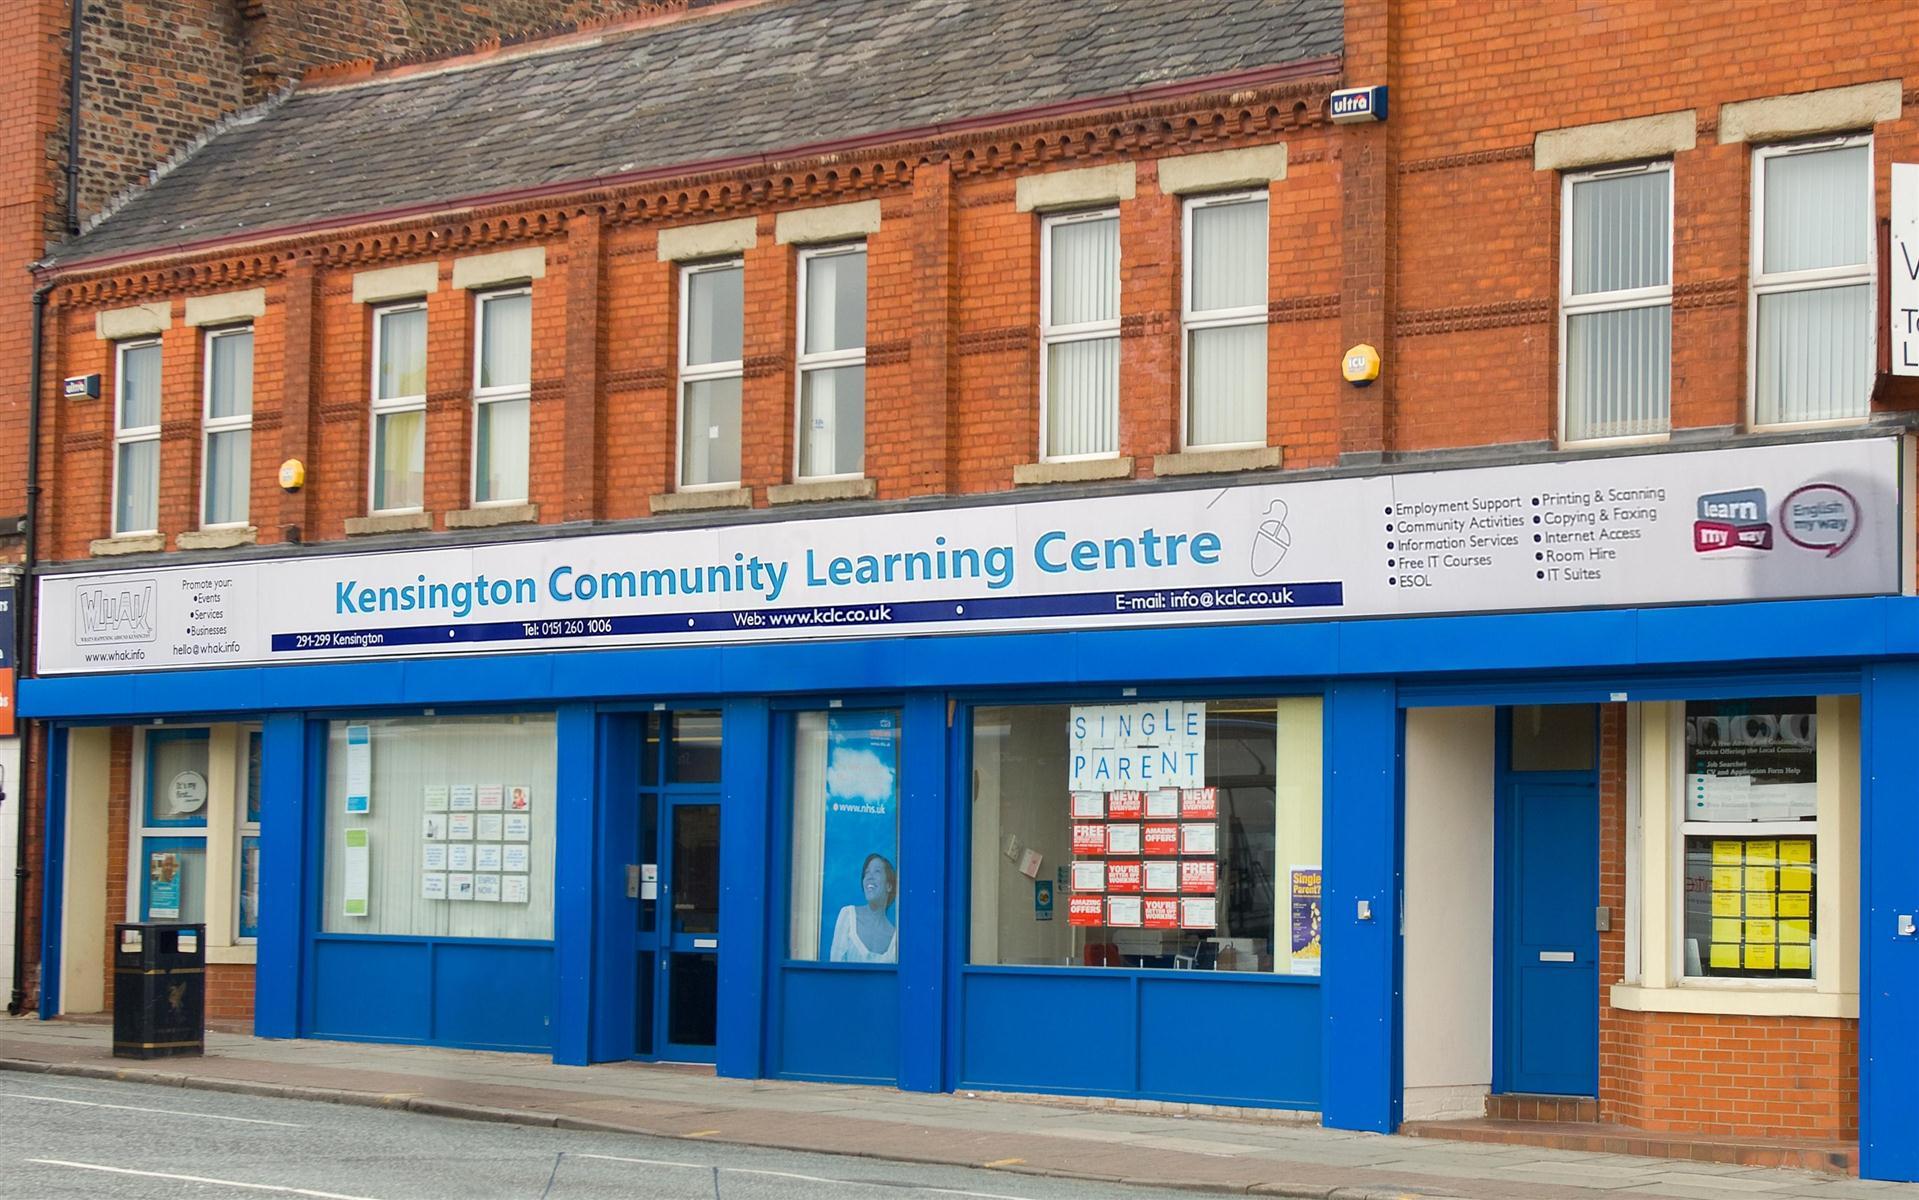 Kensington Community Learning Centre in Liverpool, GB1